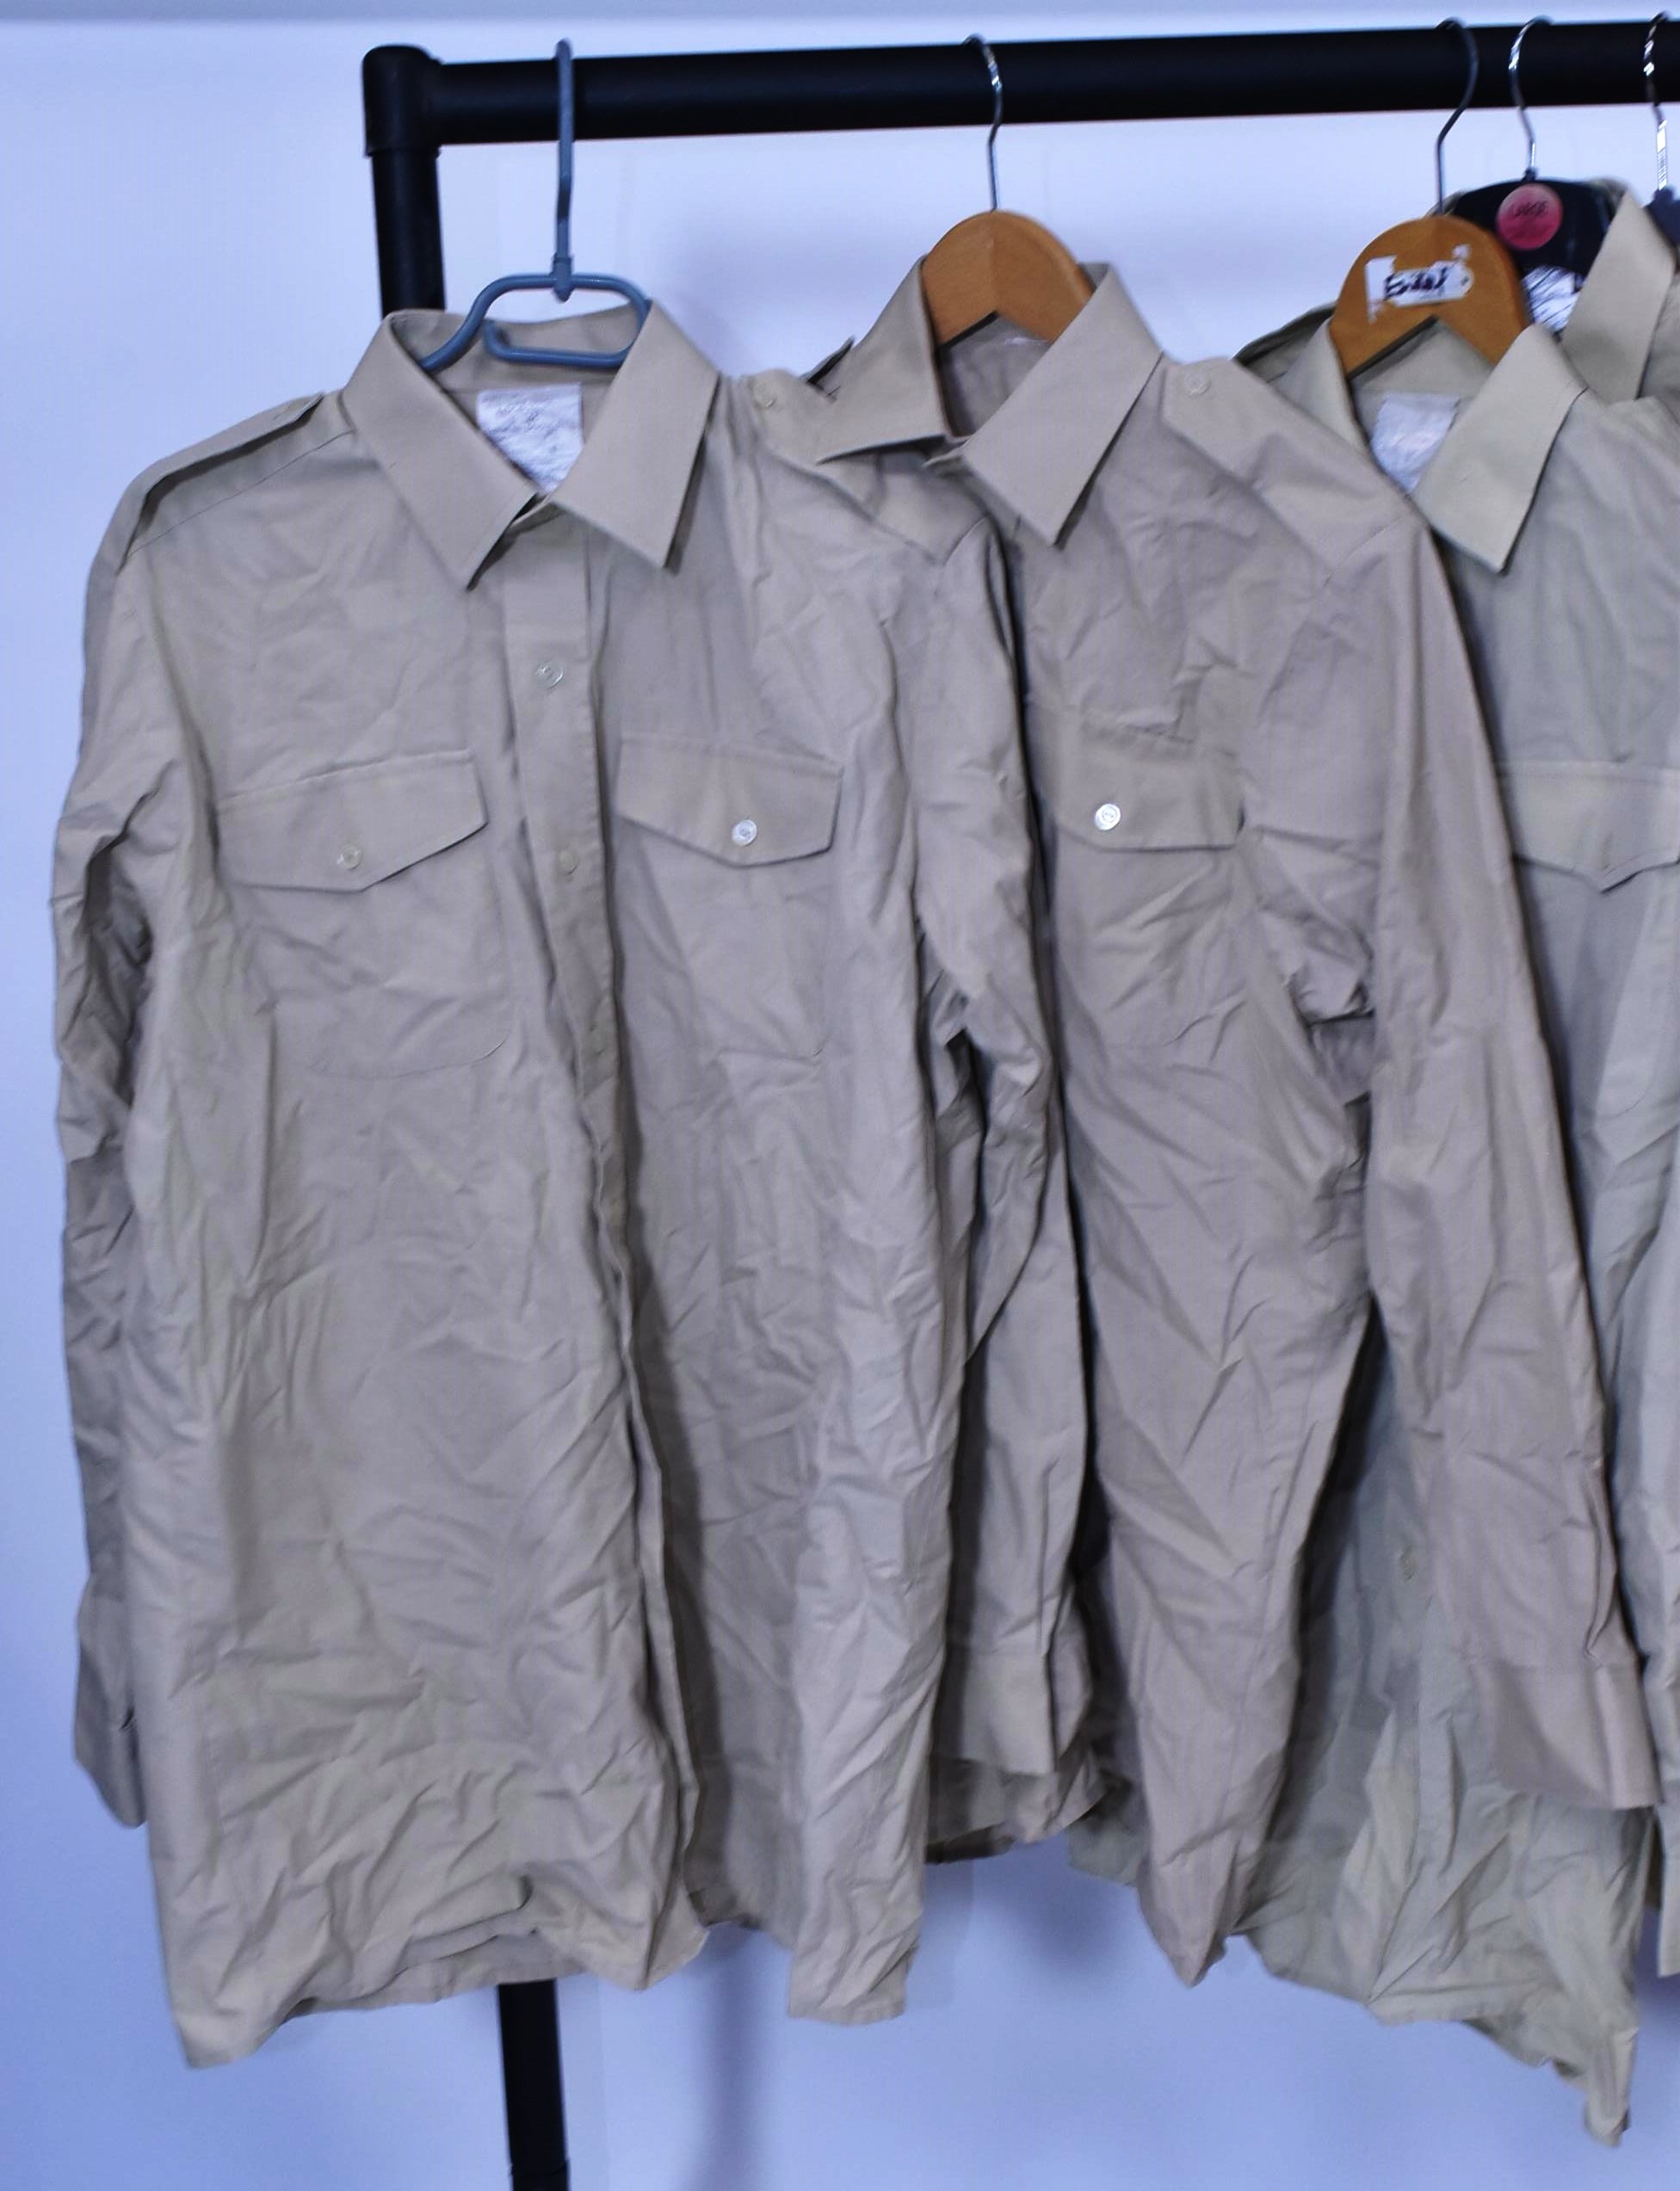 COLLECTION OF ASSORTED DESERT TAN MILITARY SHIRTS - Image 2 of 5